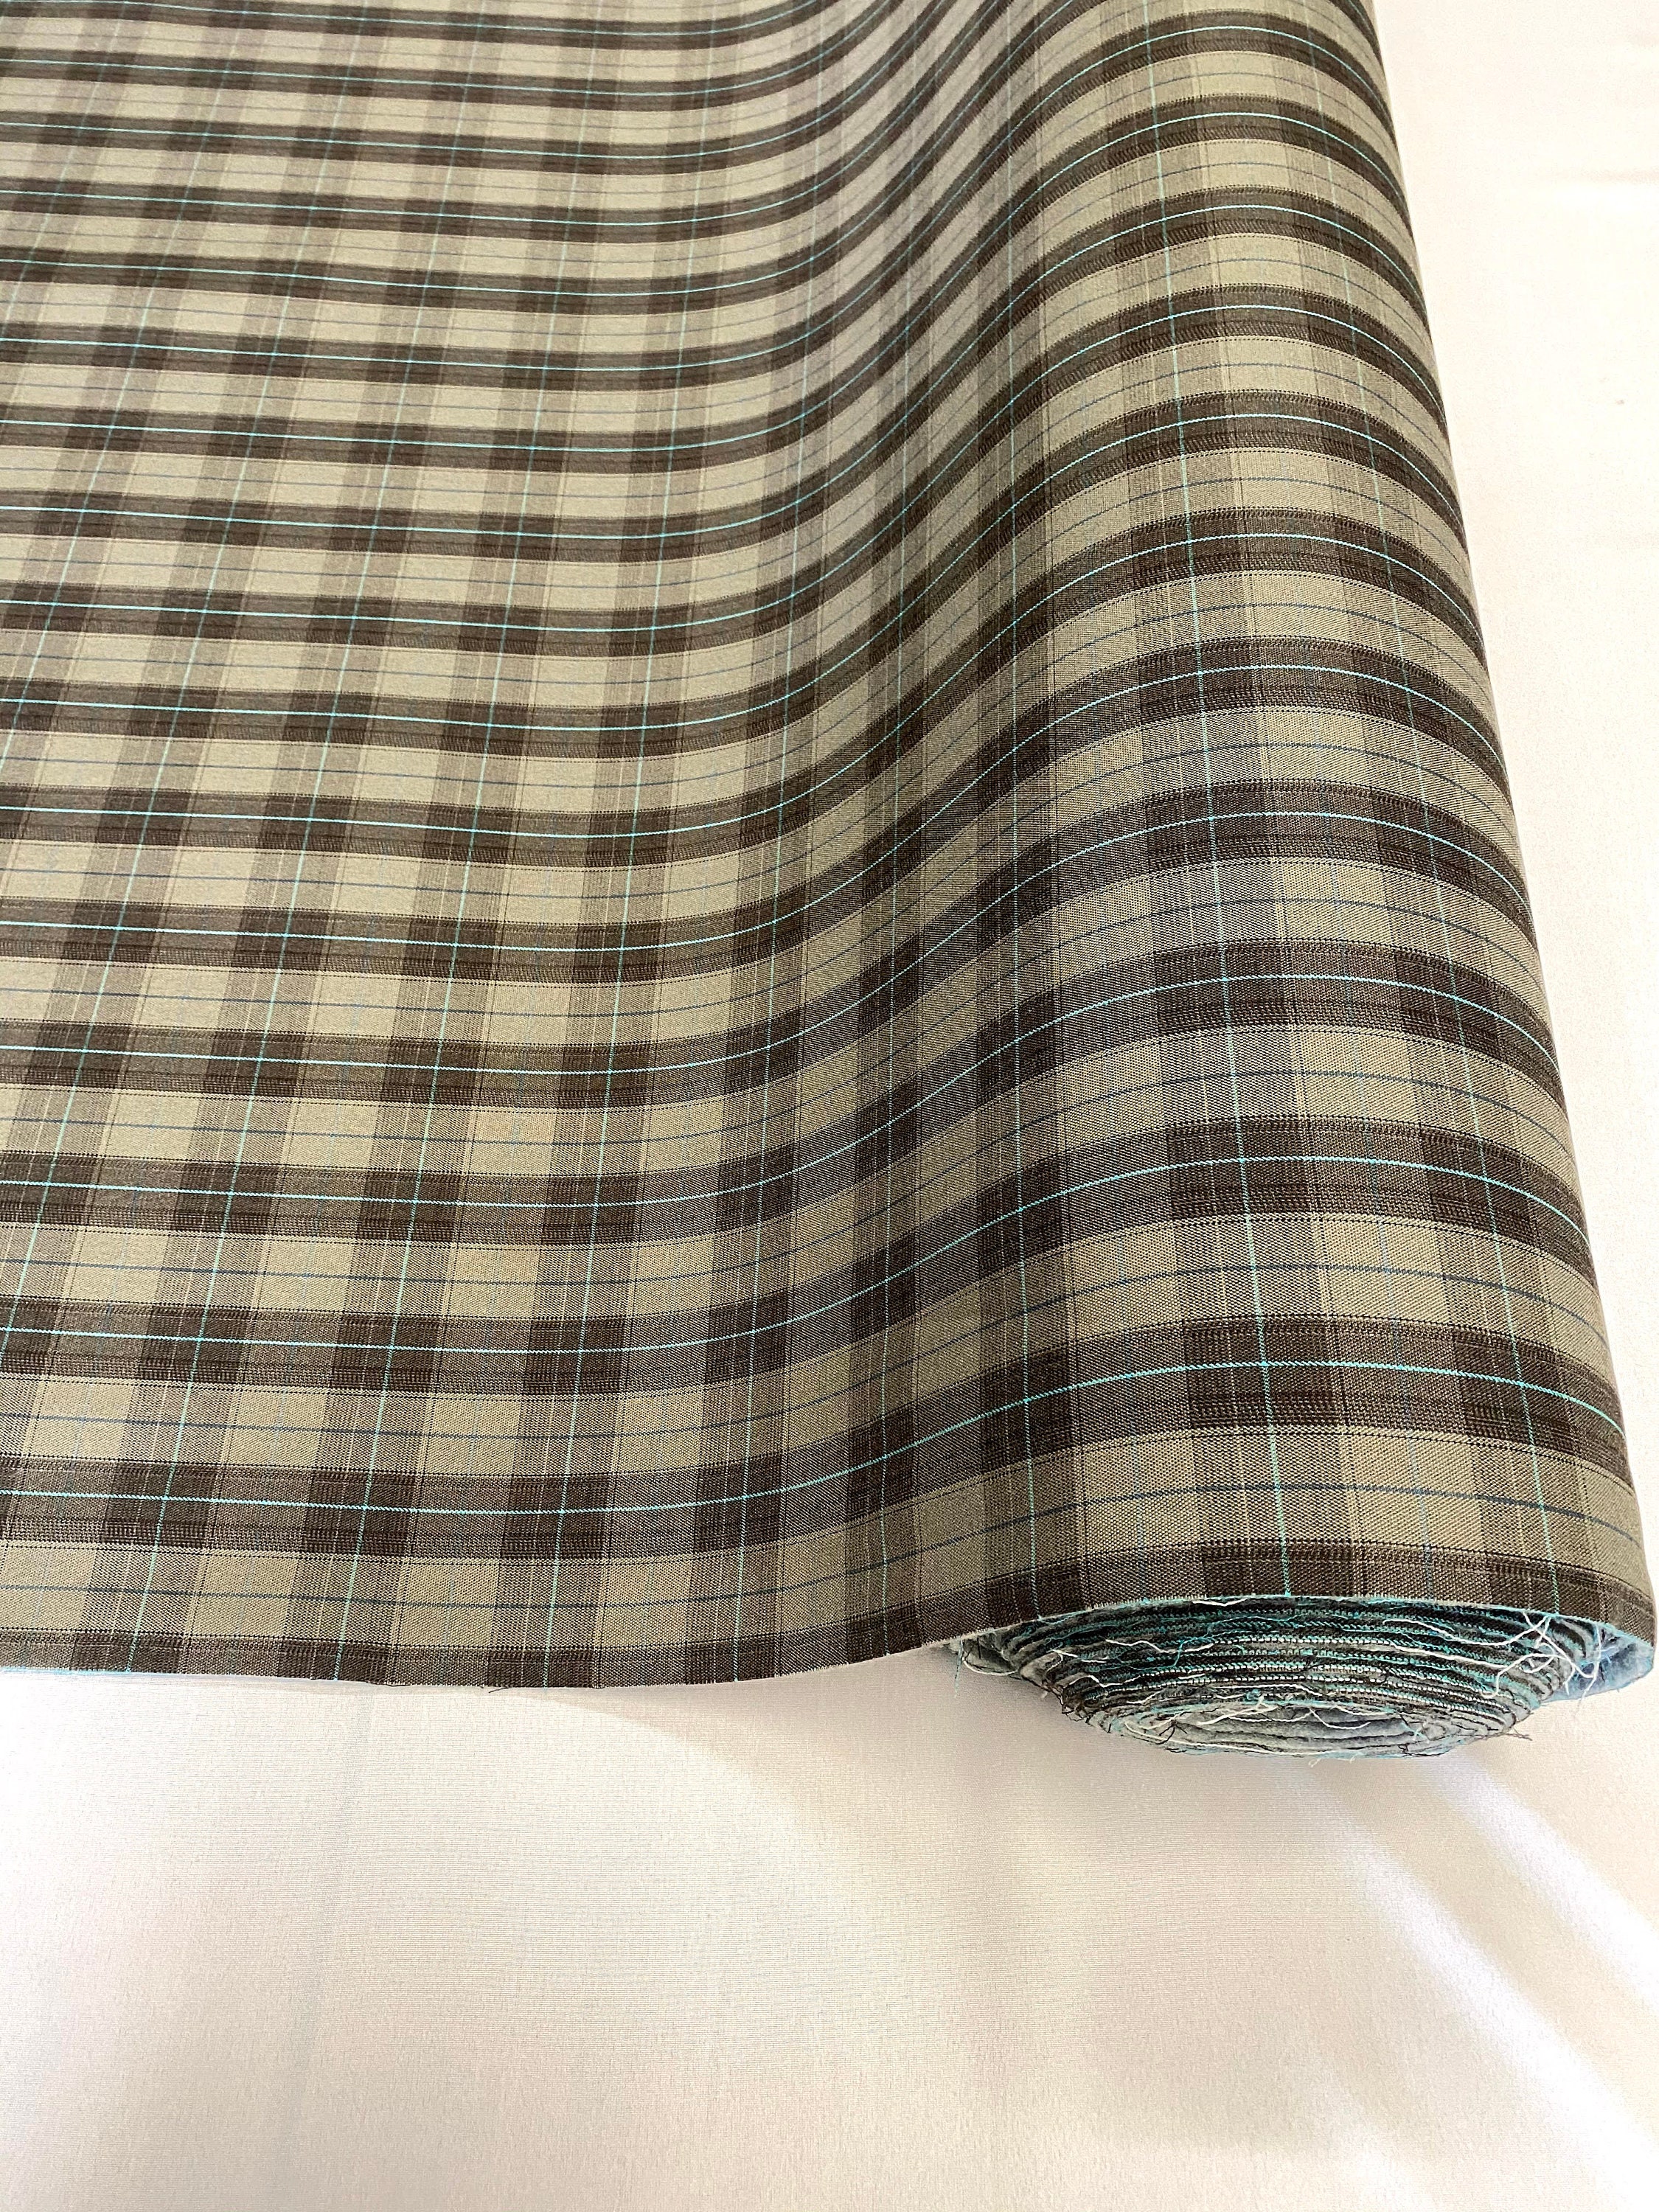 Tartan and Tweed Car Upholstery Fabric Guide